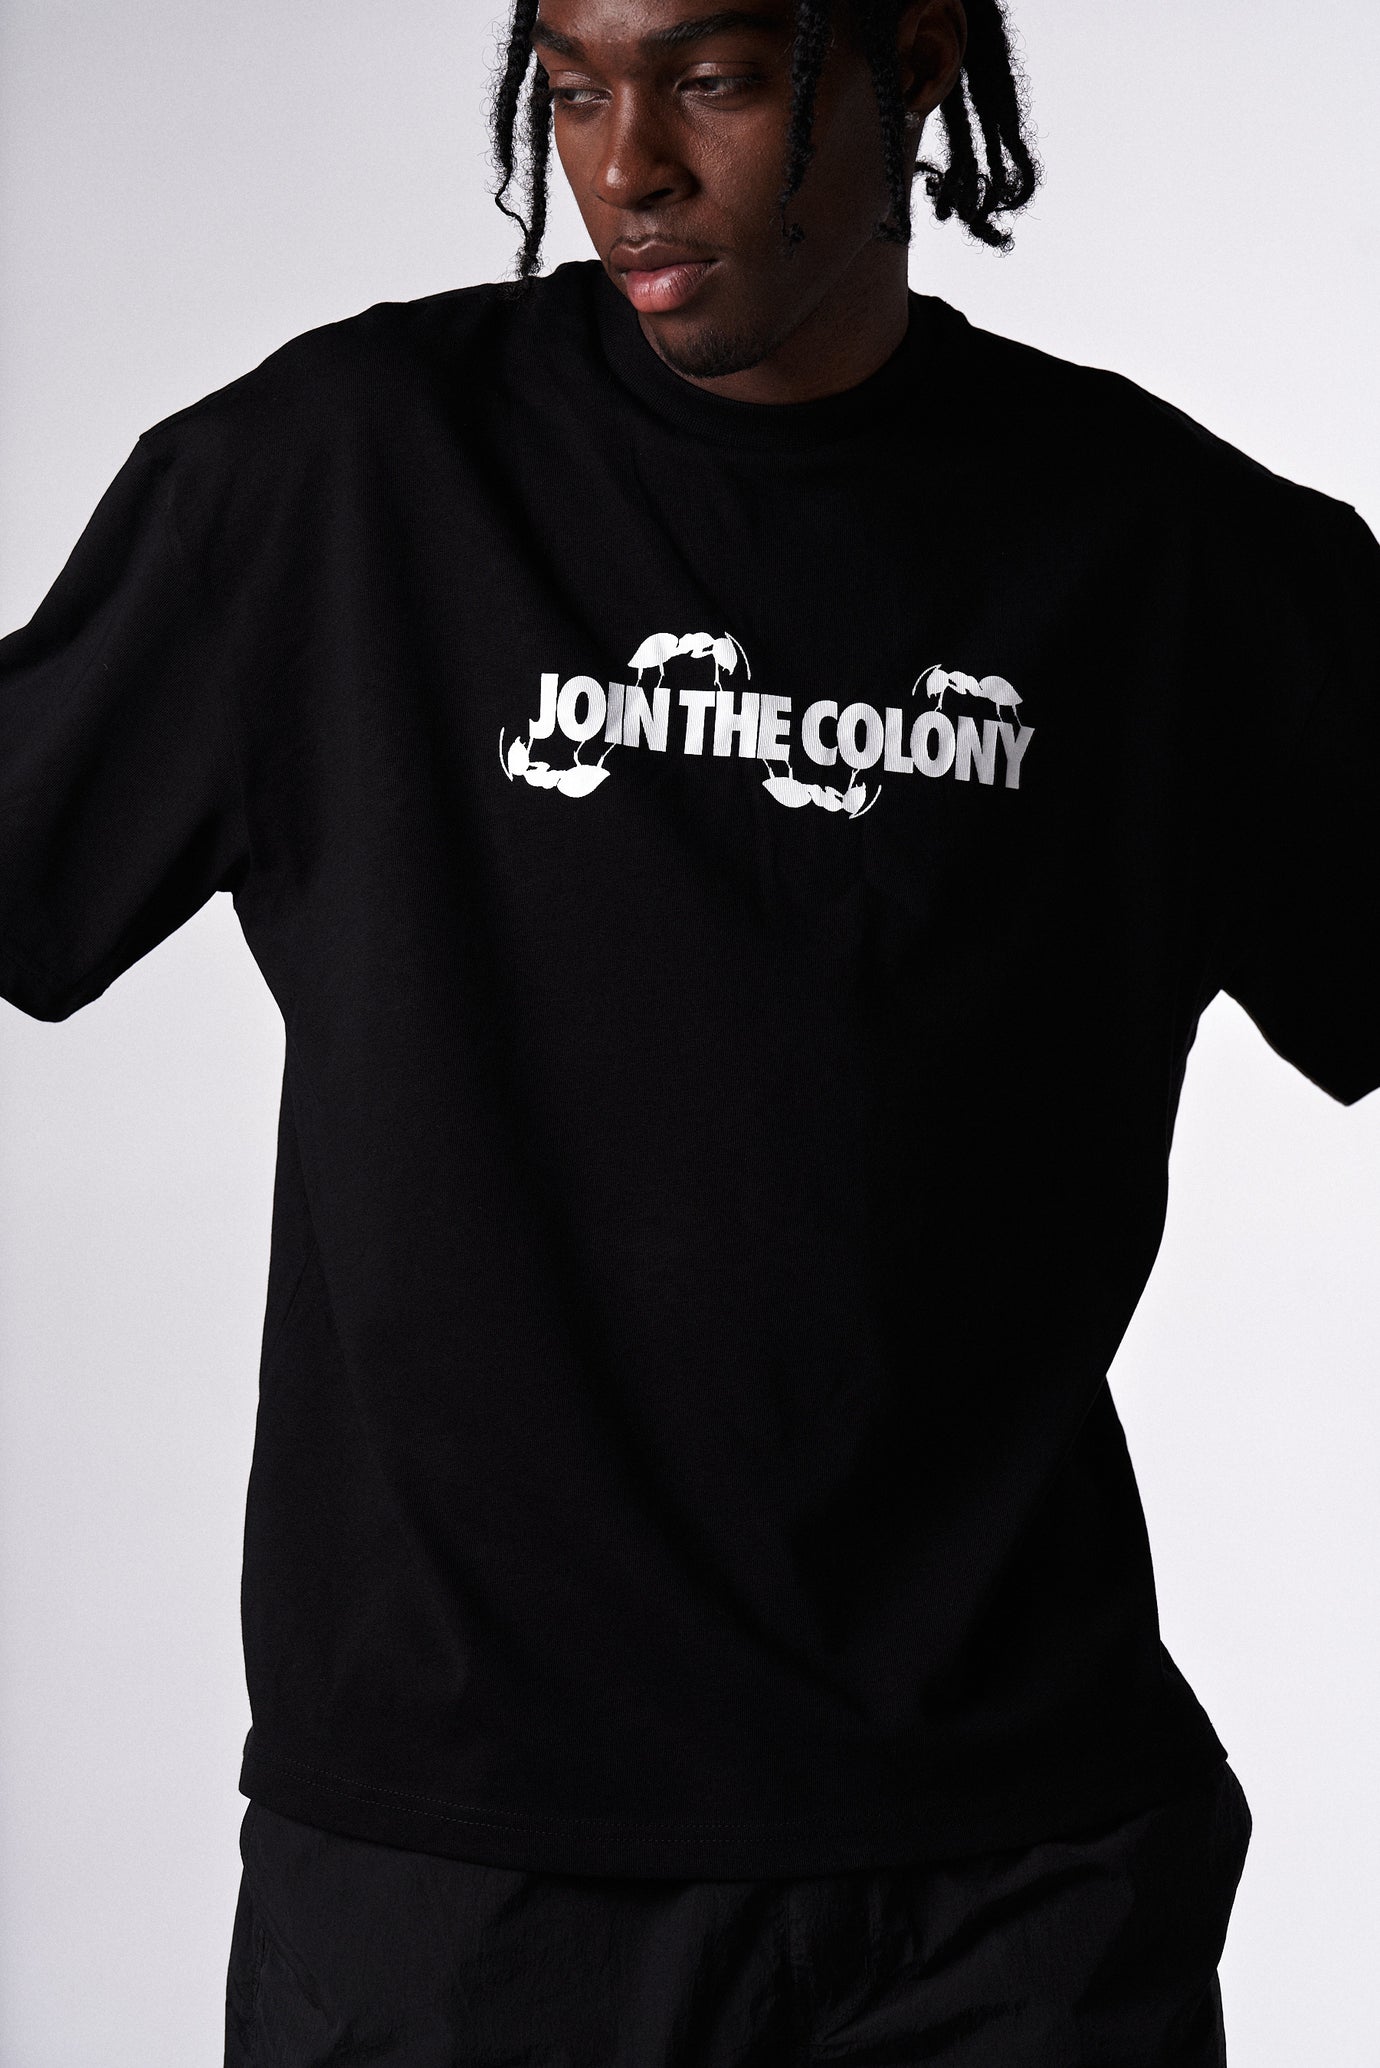 Join The Colony T-Shirt